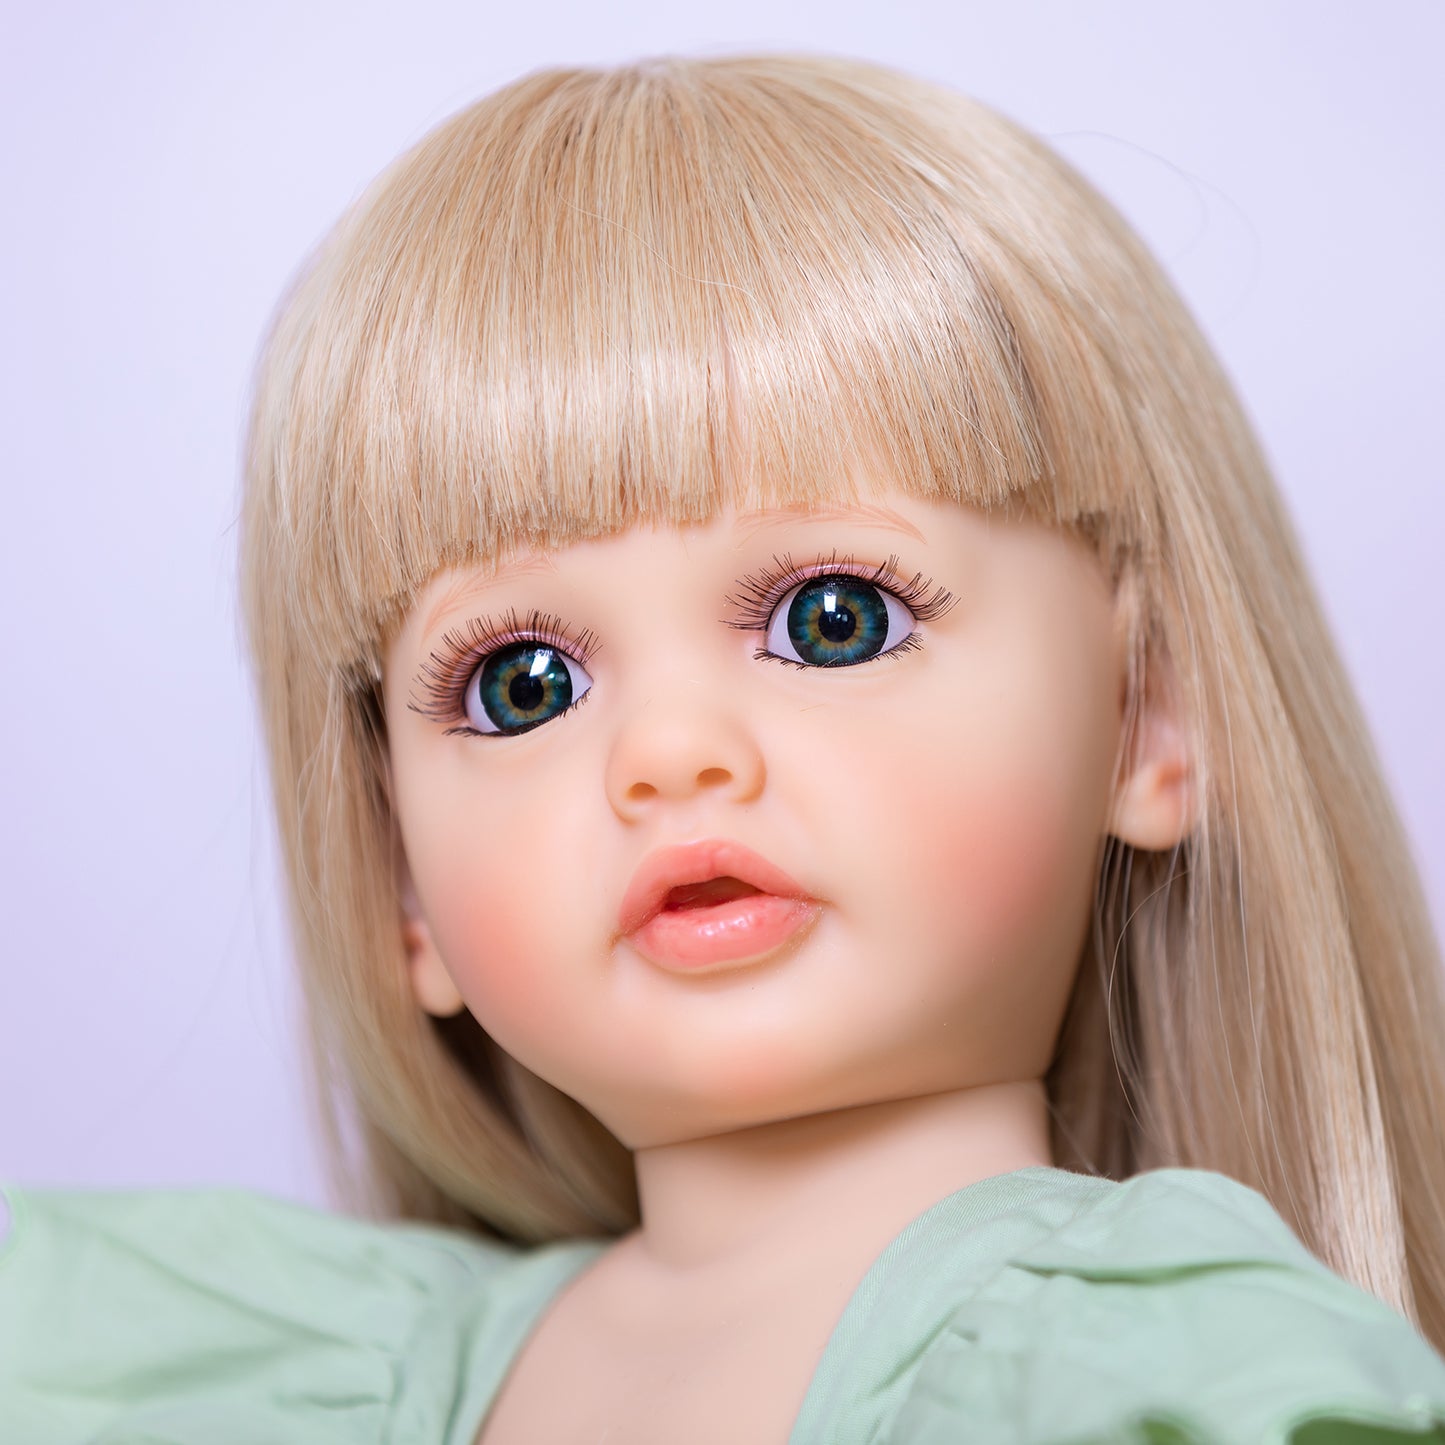 Beautiful Blonde Long Hair Princess Girls Realistic Reborn Baby Dolls Silicone Full Body Lifelike Toddler Dolls That Look Real 22 Inch 55CM Real Newborn Babies Size Reborn Dolls Toys Gifts For Ages 3+